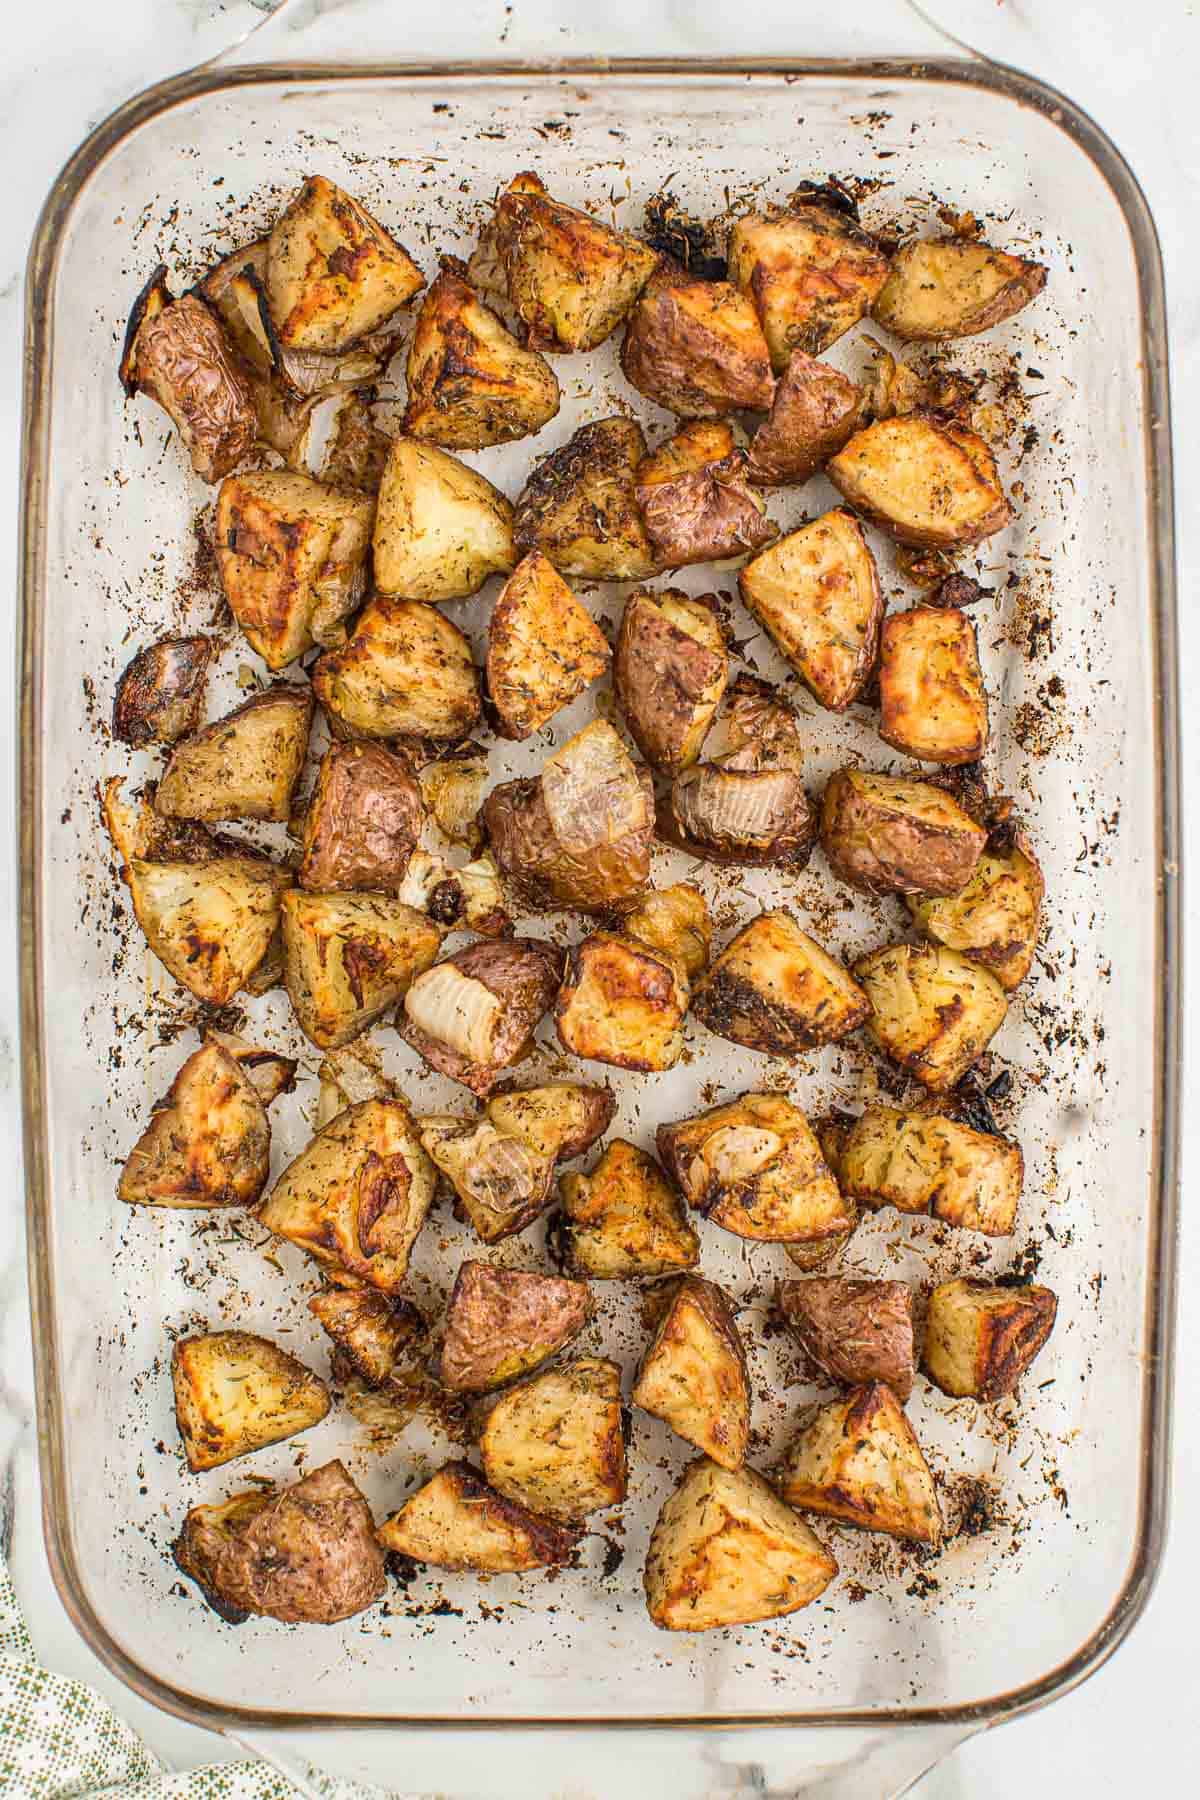 roasted potatoes and onions in a baking dish